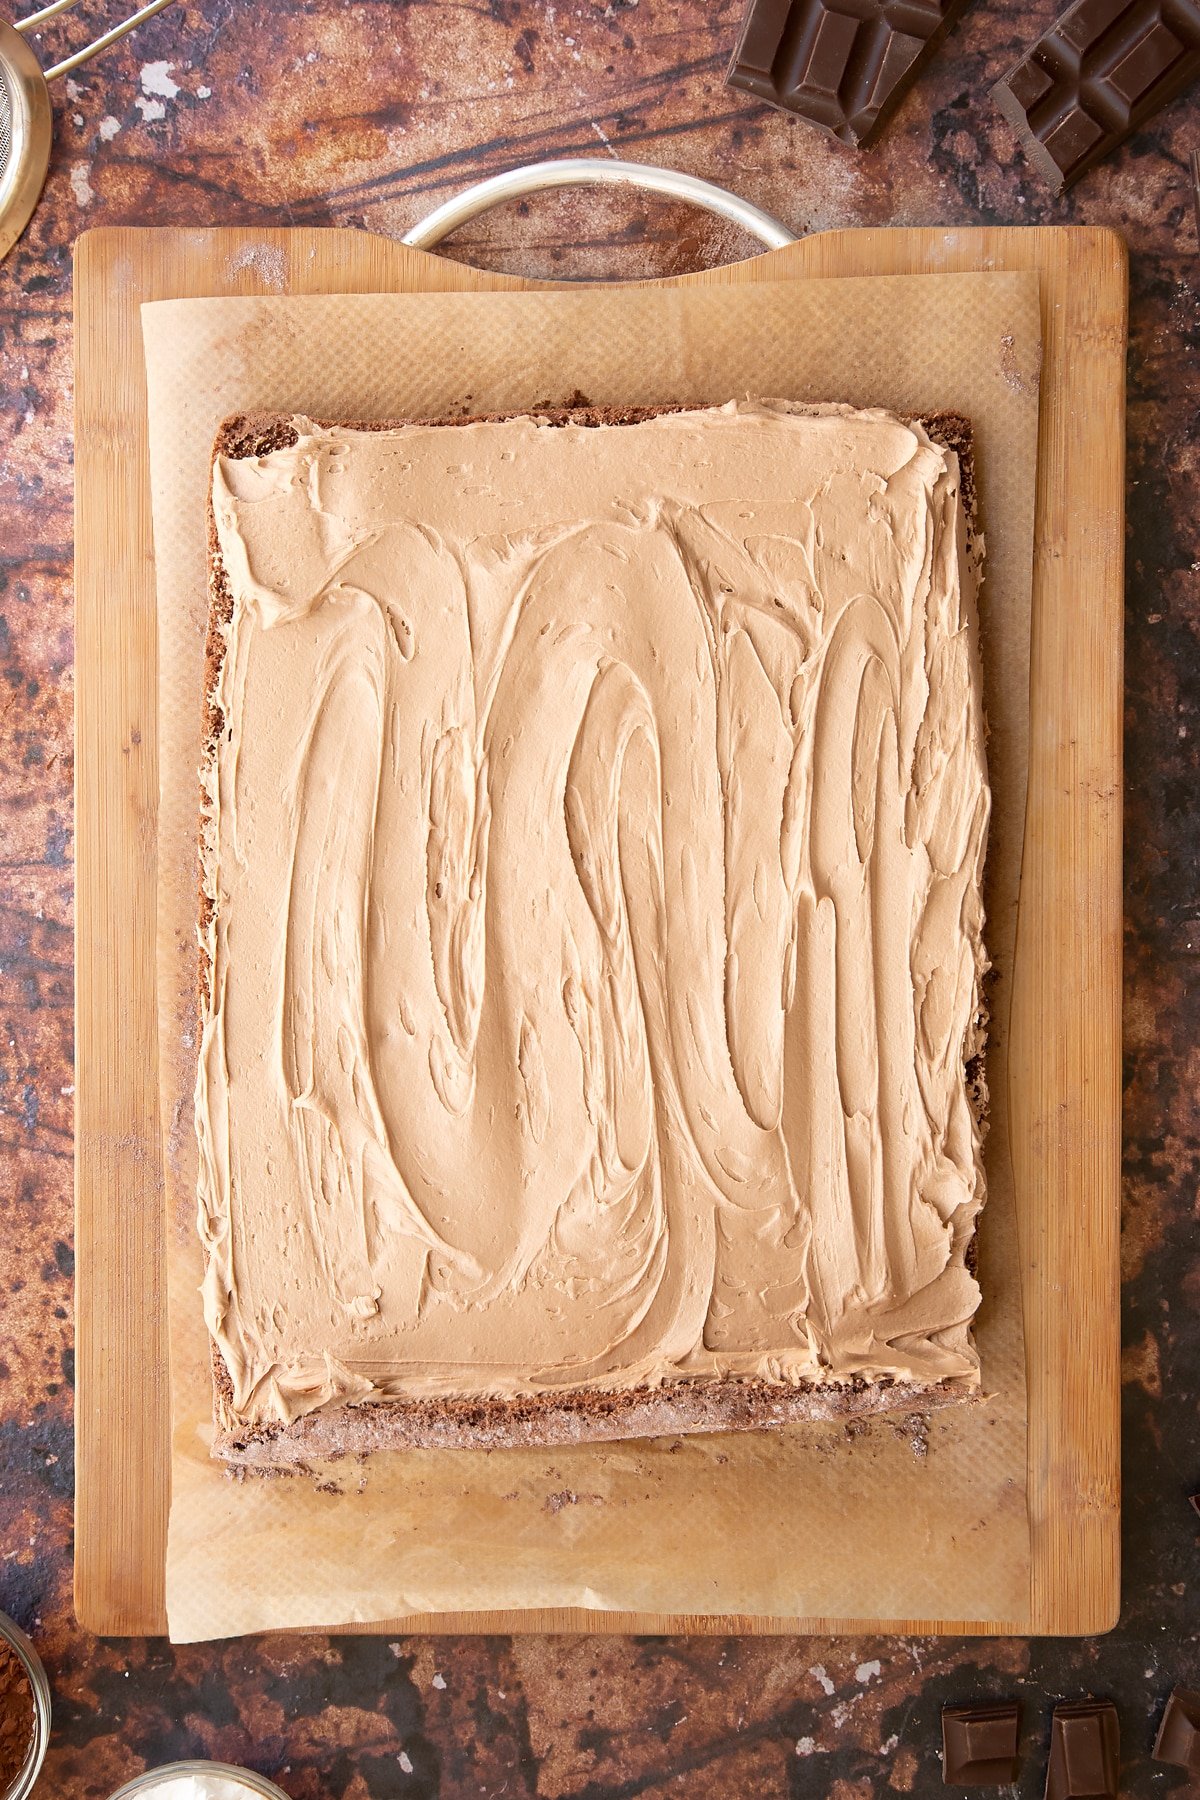 A chocolate sponge spread with chocolate buttercream on a wooden board. 